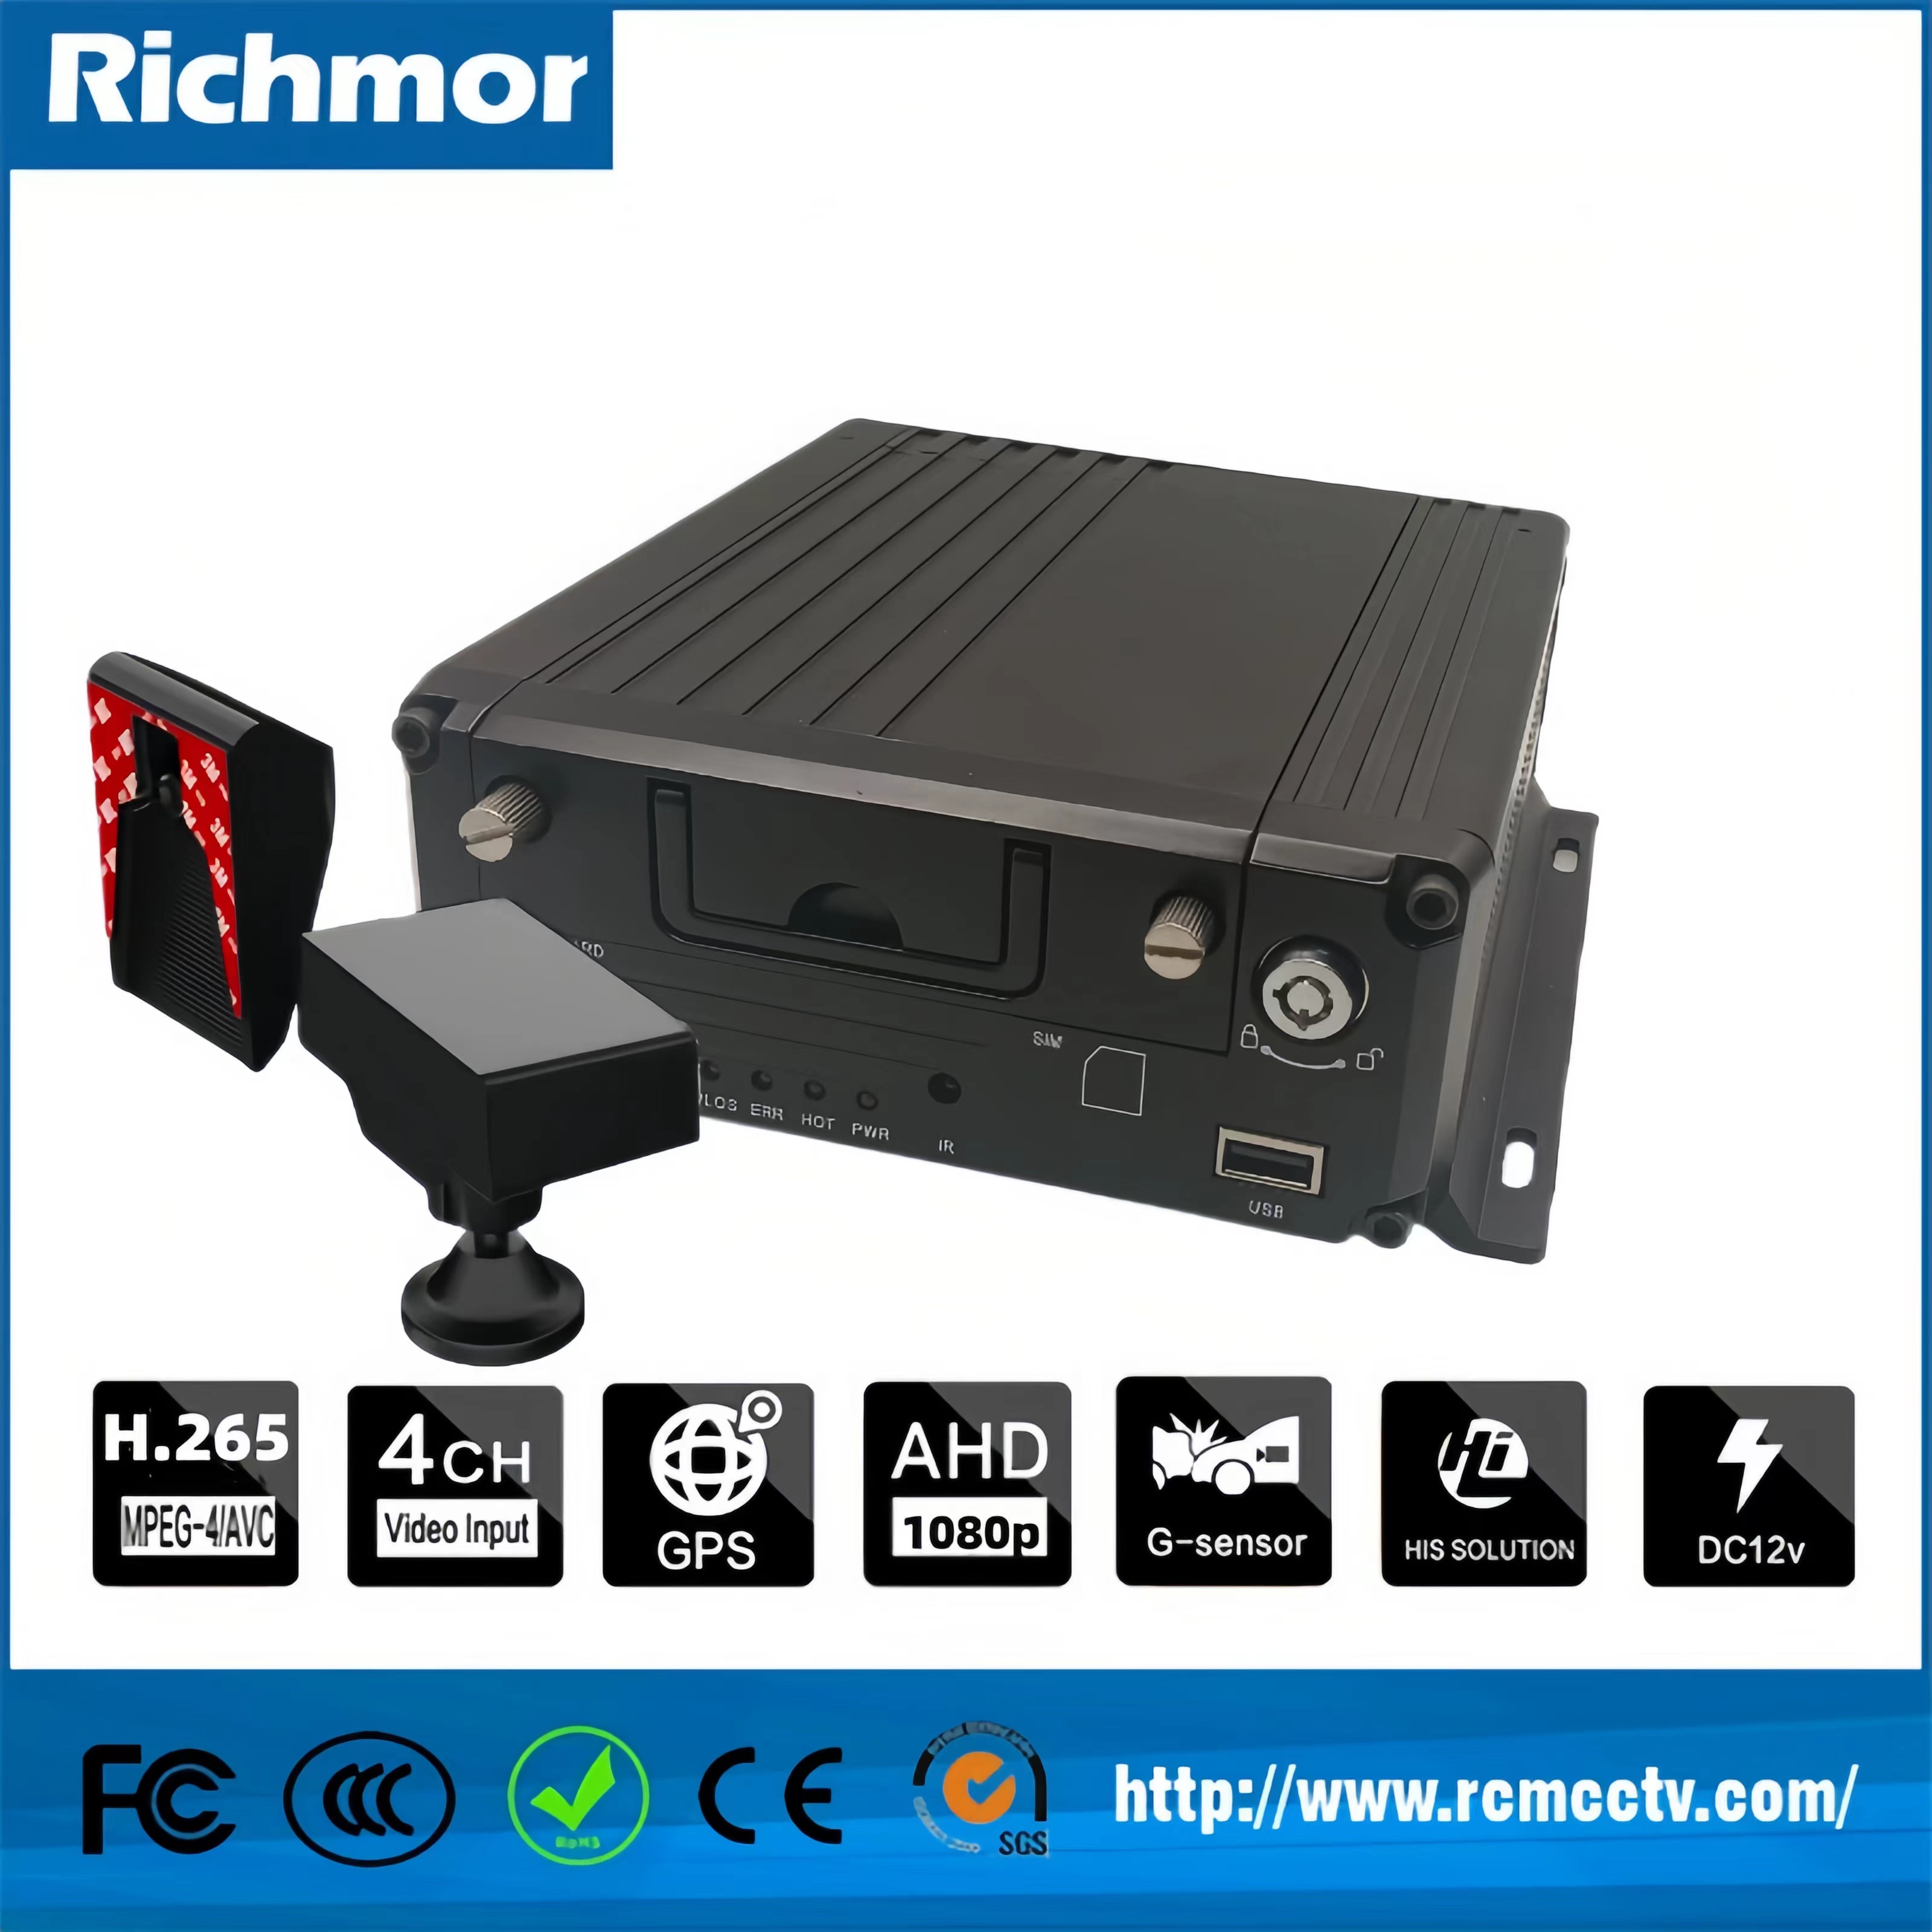 new arrival products 8204 8208 4G AI MDVR ADAS DSM BSD function optional H.264/H.265 720P/1080P video recorder